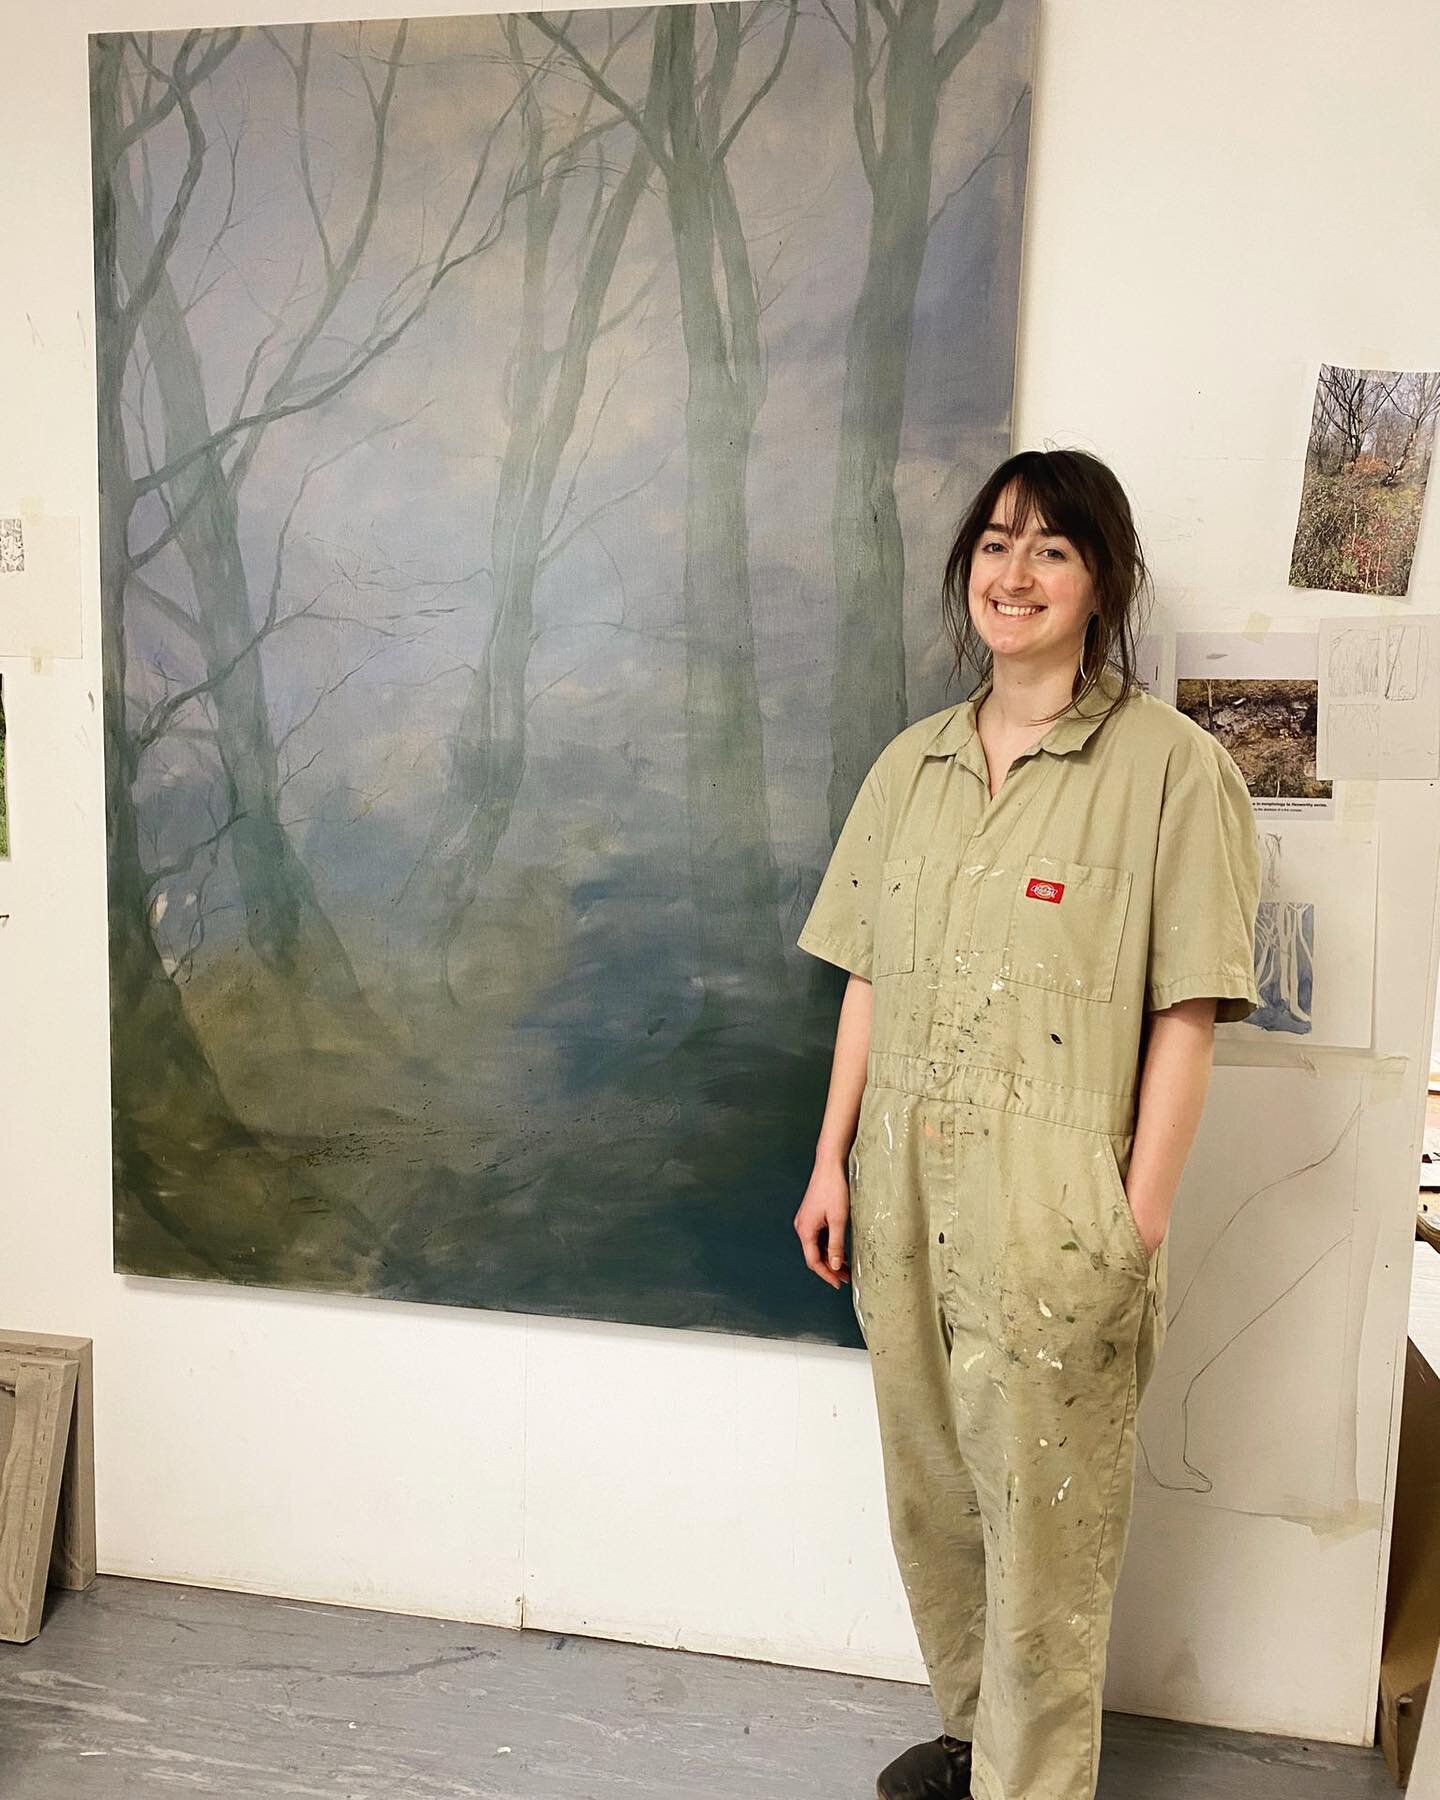 Thank you Xanthe for a fab afternoon at the studio - it&rsquo;s always such a treat to visit an artists&rsquo;s studio to see how they work, and to understand more about where they draw inspiration from.

Xanthe blends influences from her studies at 